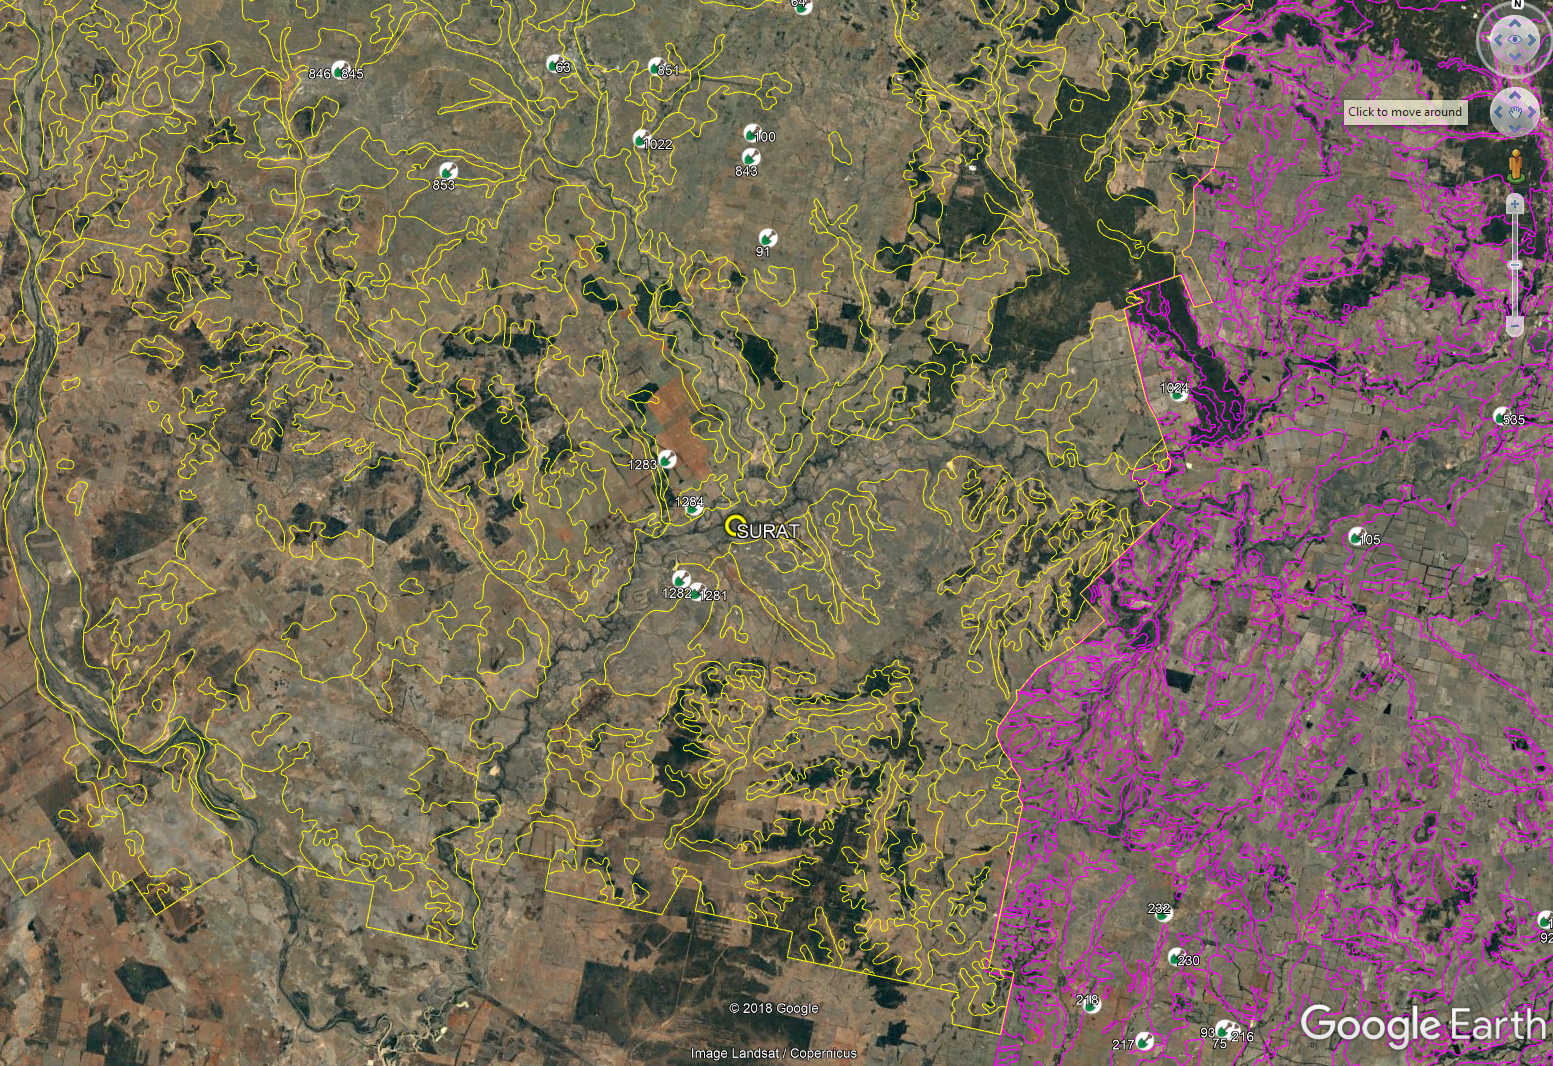 The map shows Land Resource Mapping (LRA) near Surat with APSoil sites. Roma LRA units are mapped yellow and Marilla, Tara and Chinchilla LRA in pink.